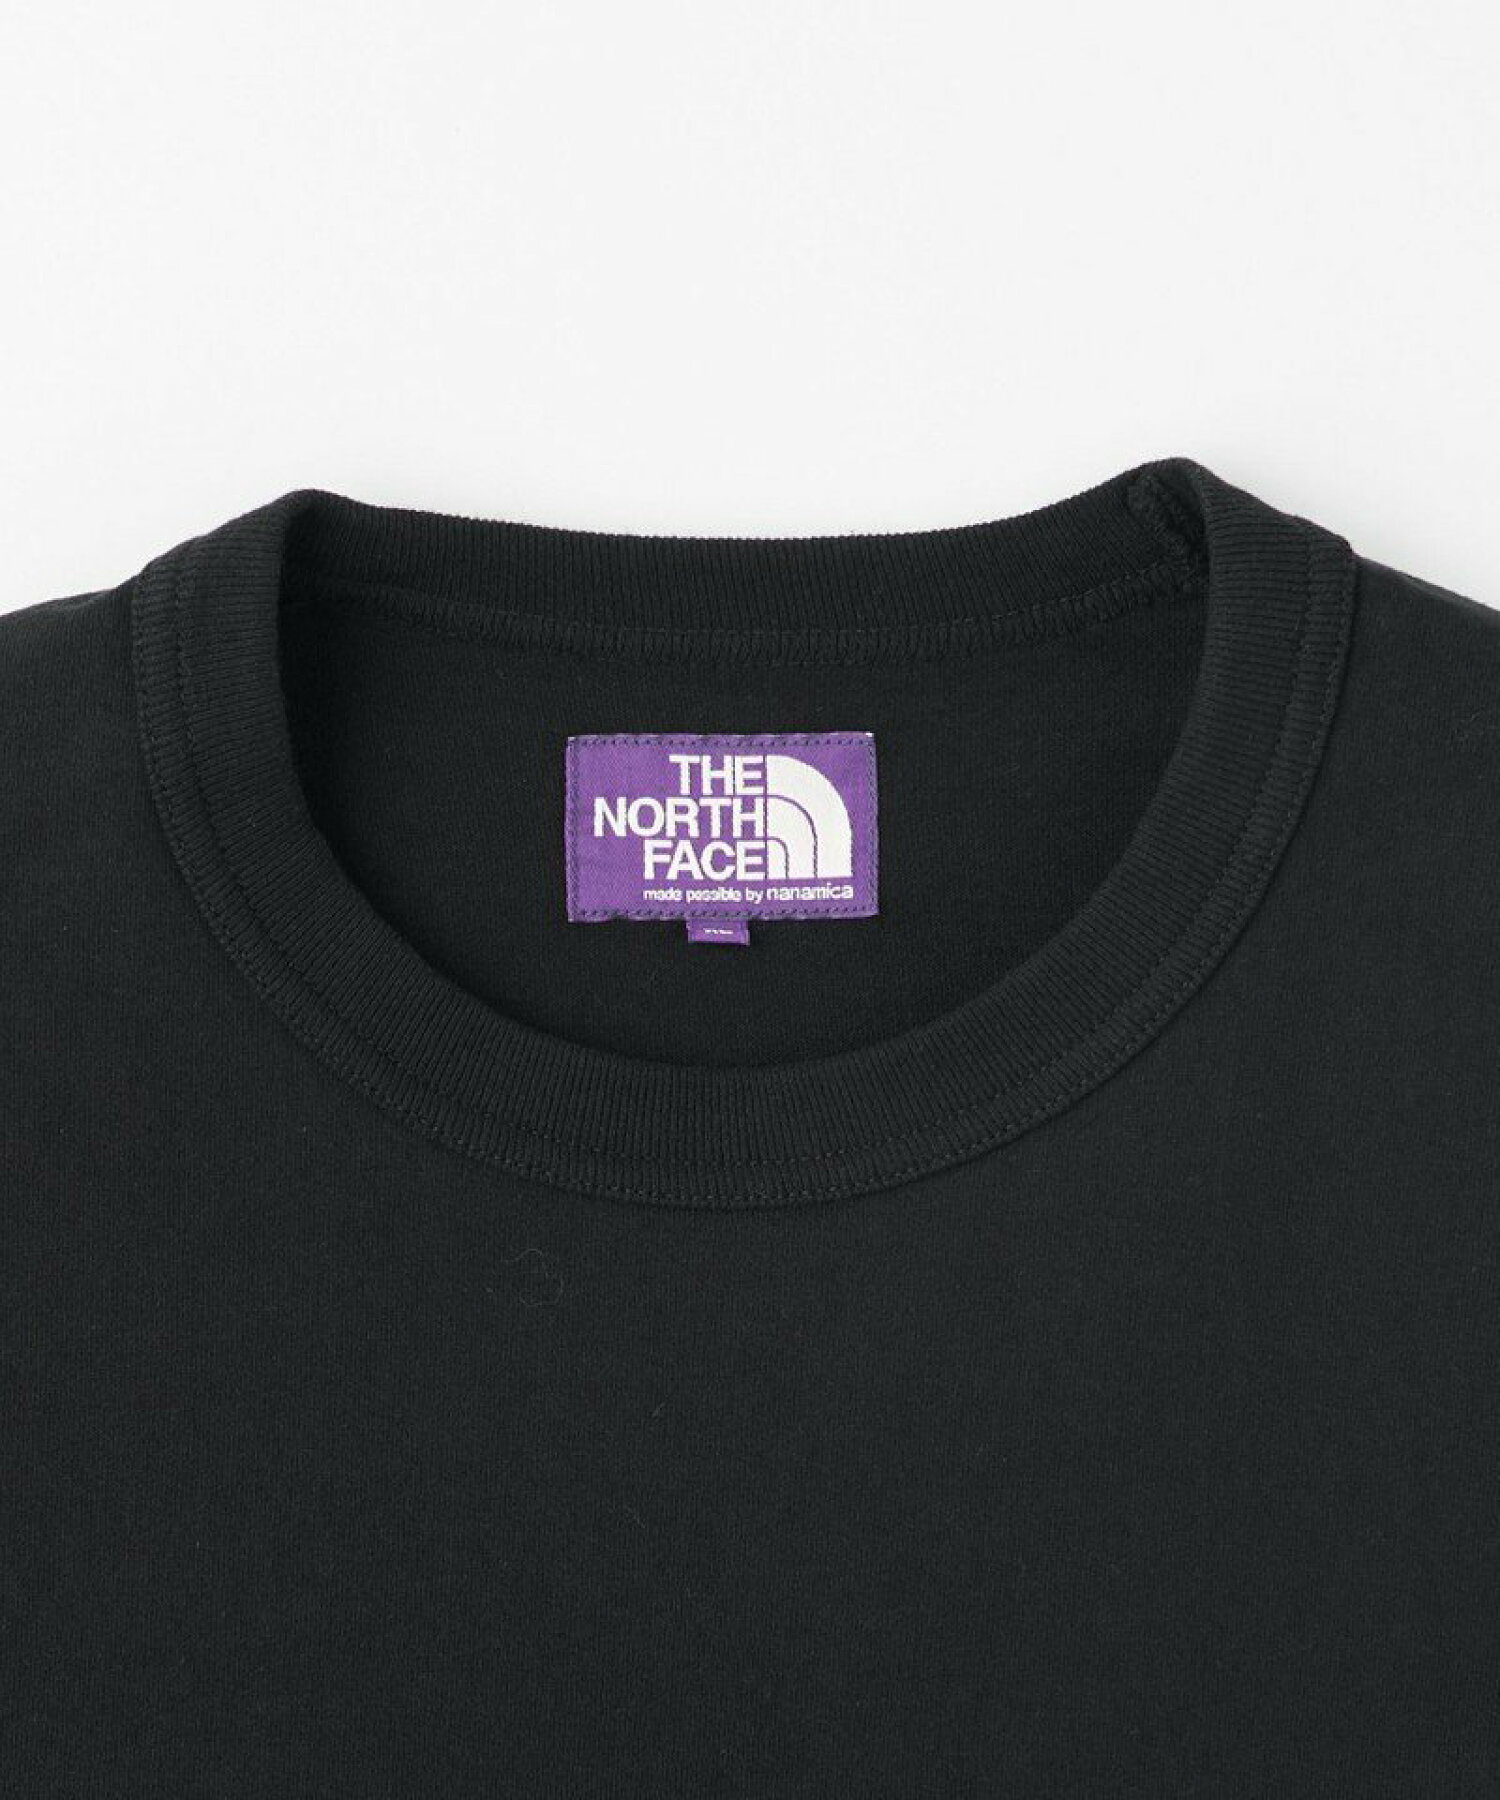 <THE NORTH FACE PURPLE LABEL * monkey time> POCKET TEE mtEX/Tシャツ